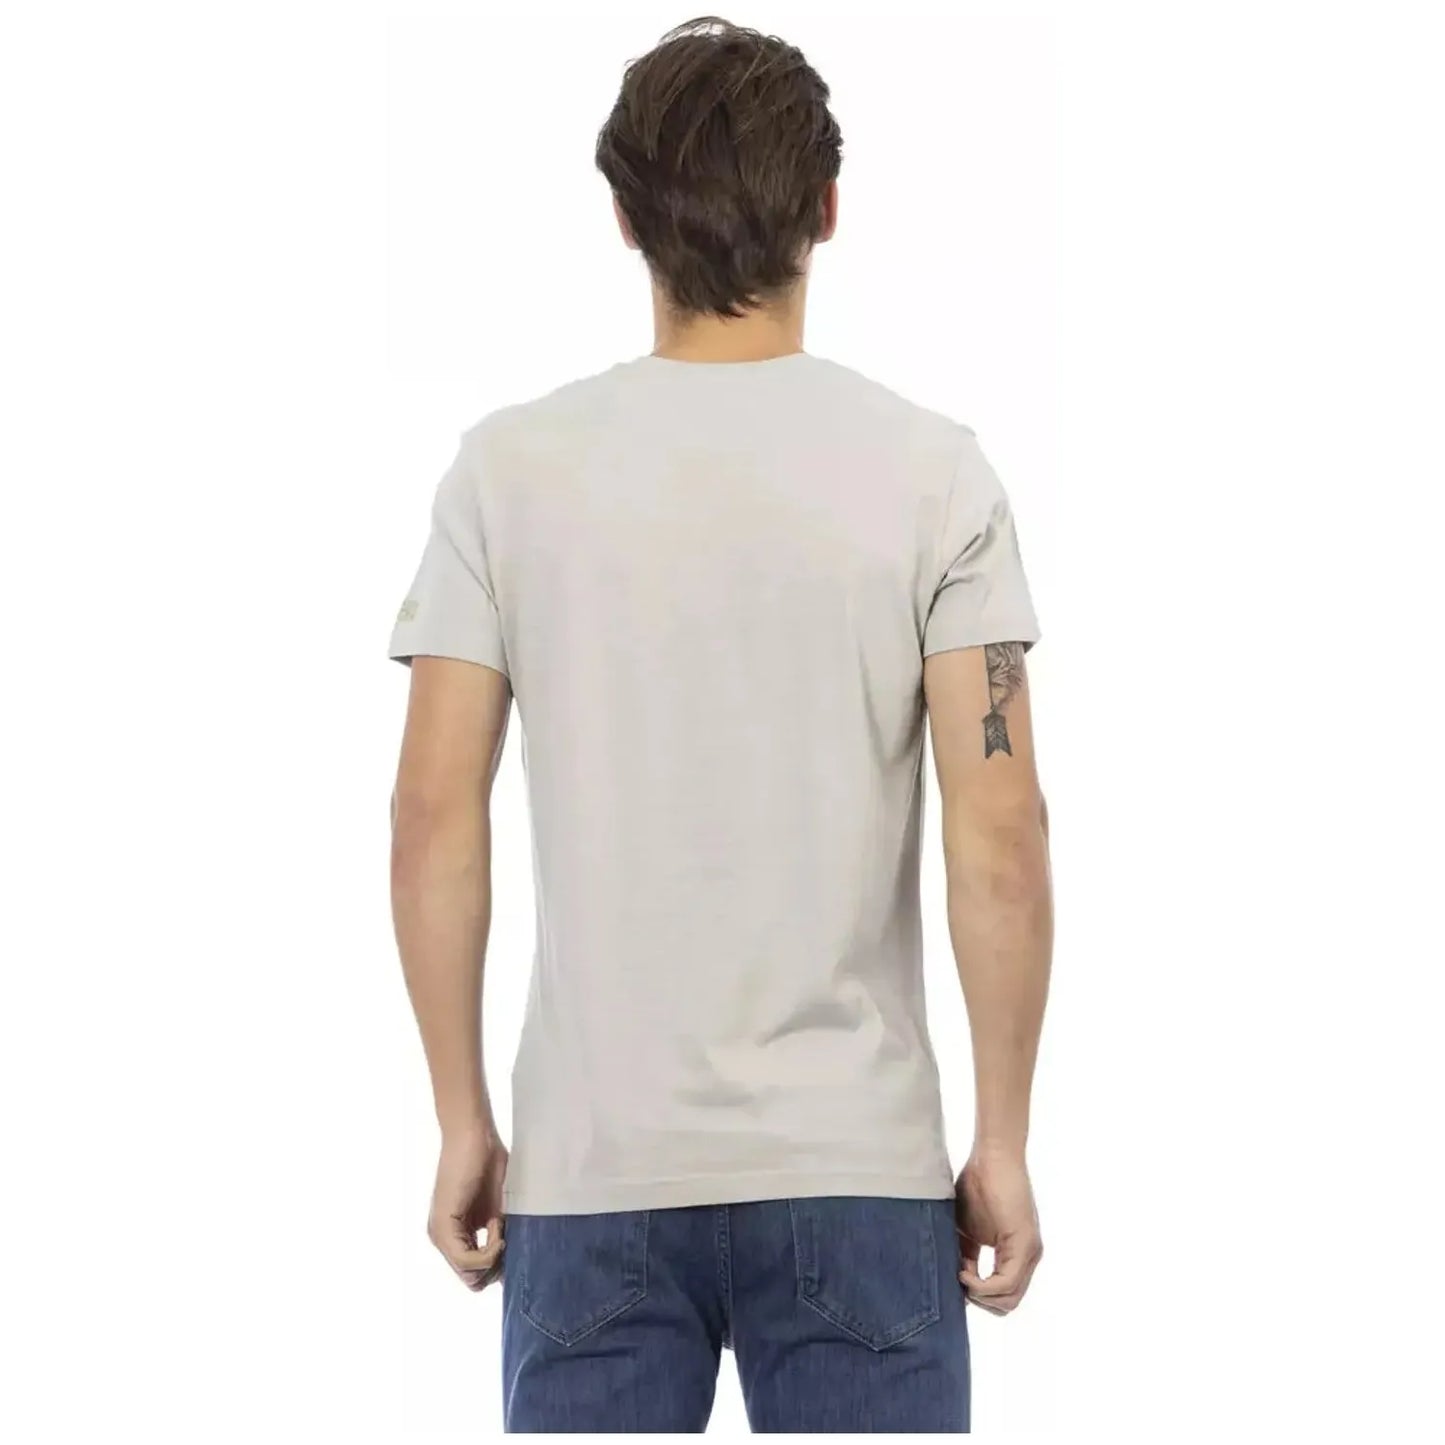 Trussardi Action Elegant V-Neck Tee with Exclusive Front Print gray-cotton-t-shirt-56